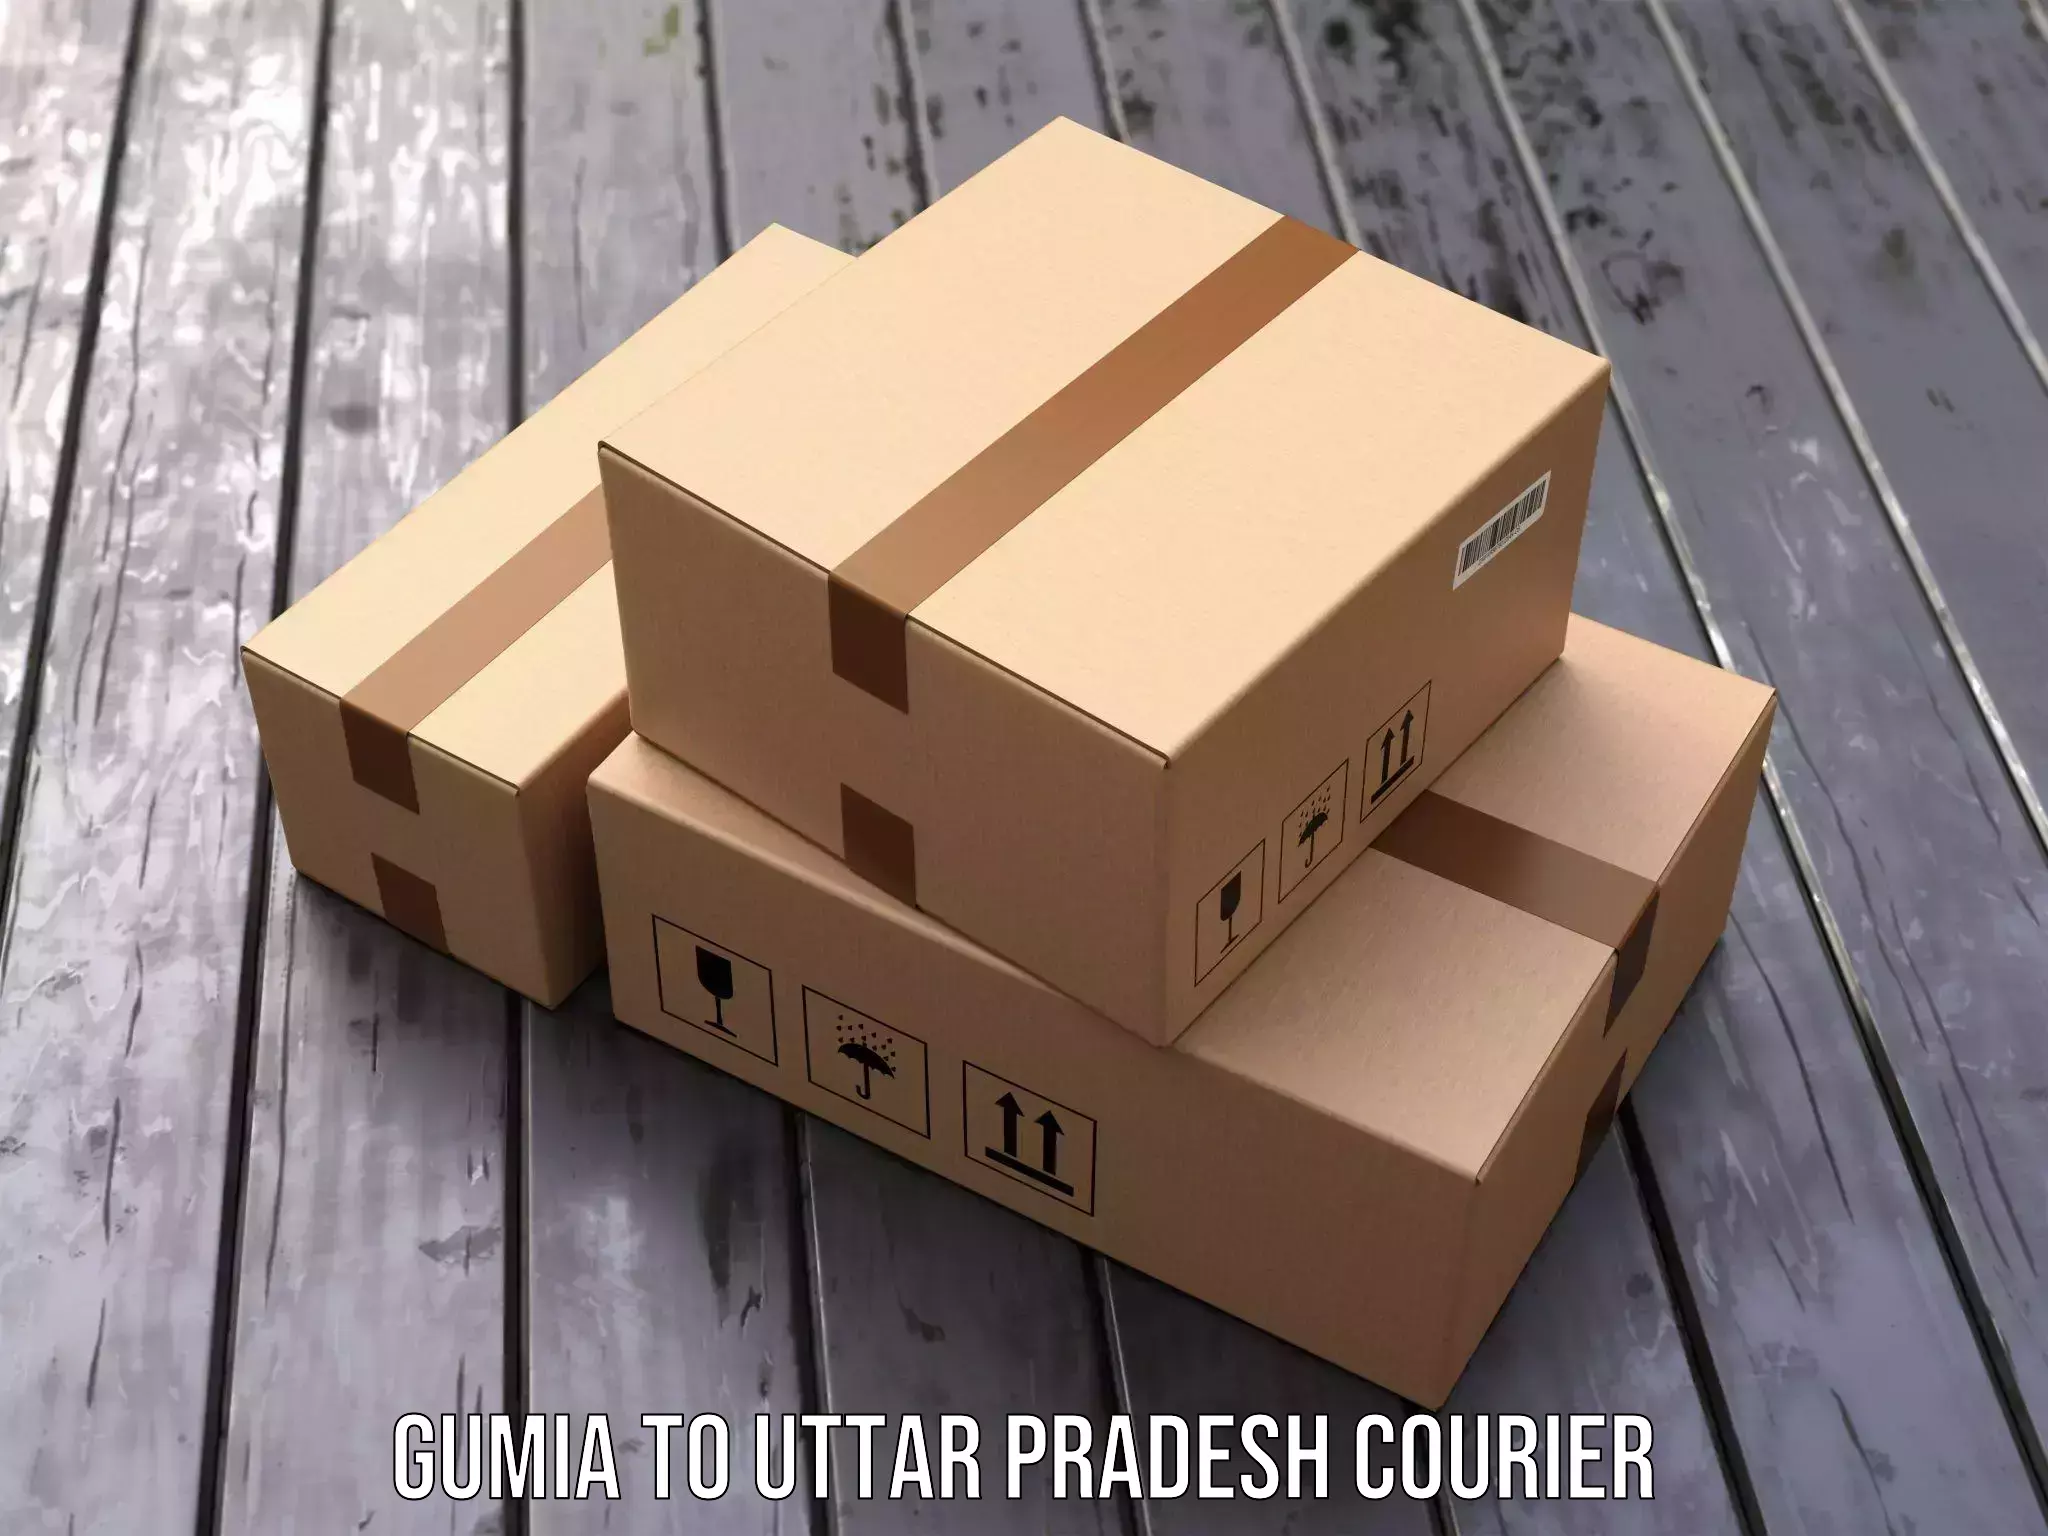 Express package services Gumia to Uttar Pradesh